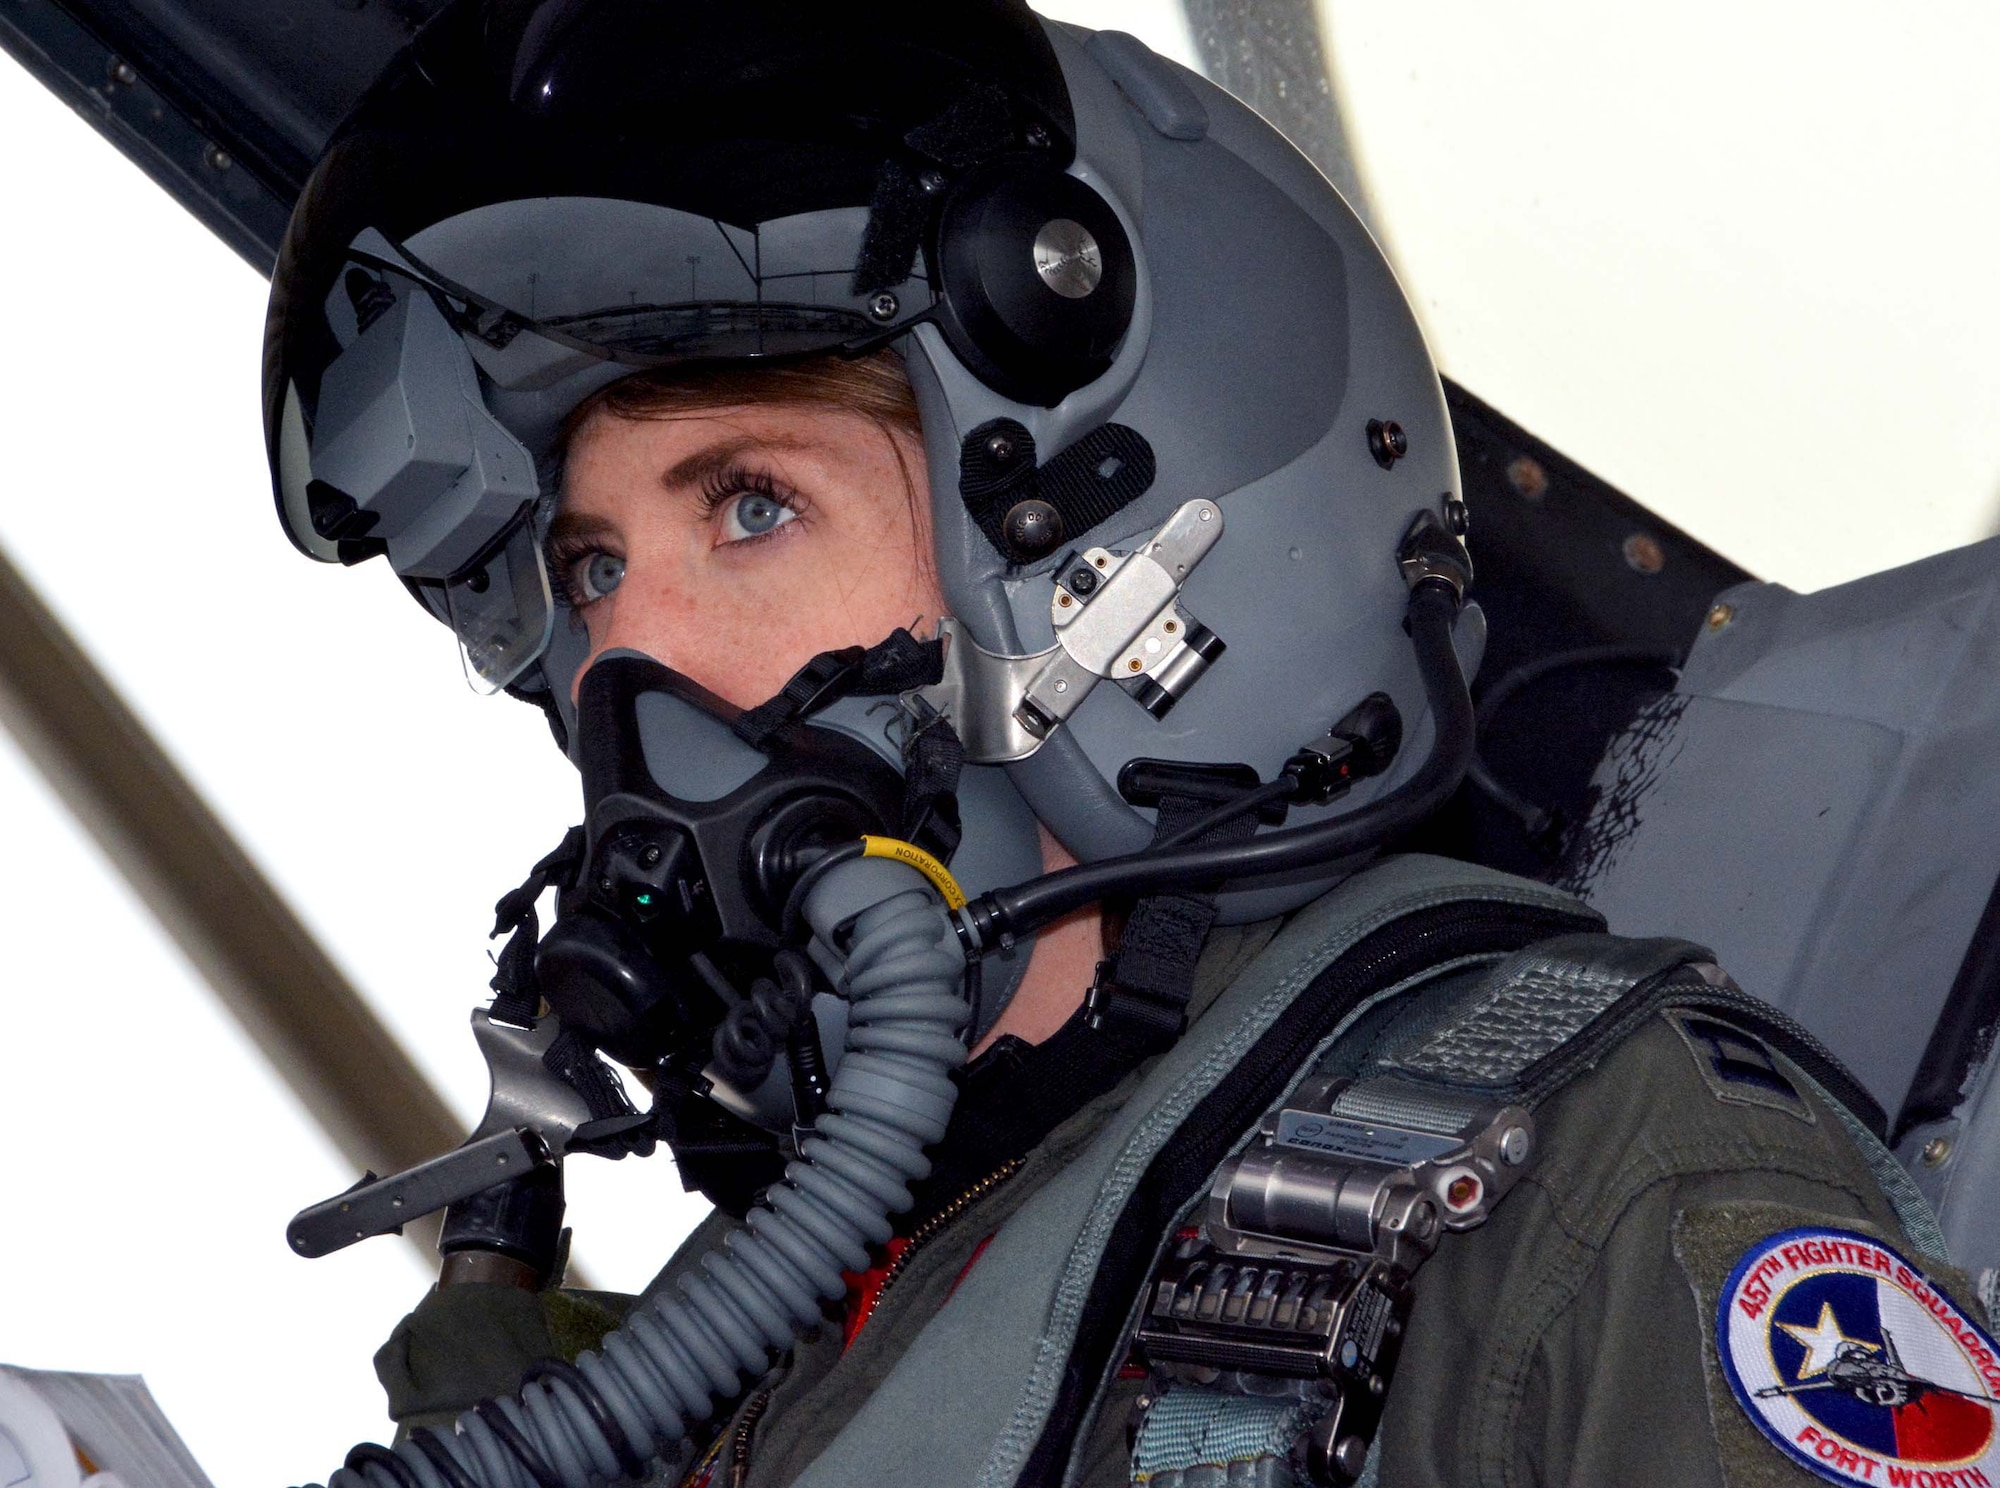 Capt. Michelle “Mace” Curran, 355th Fighter Squadron F-16 pilot, looks up during fighter jet launch preparations on the flightline, Mar. 4, 2017. Curran was the first woman assigned to fly in the 355th FS and attributed her success to her parents, leadership and strong women in aviation past and present who’ve helped pave the way. (U.S. Air Force photo by Staff Sgt. Samantha Mathison)